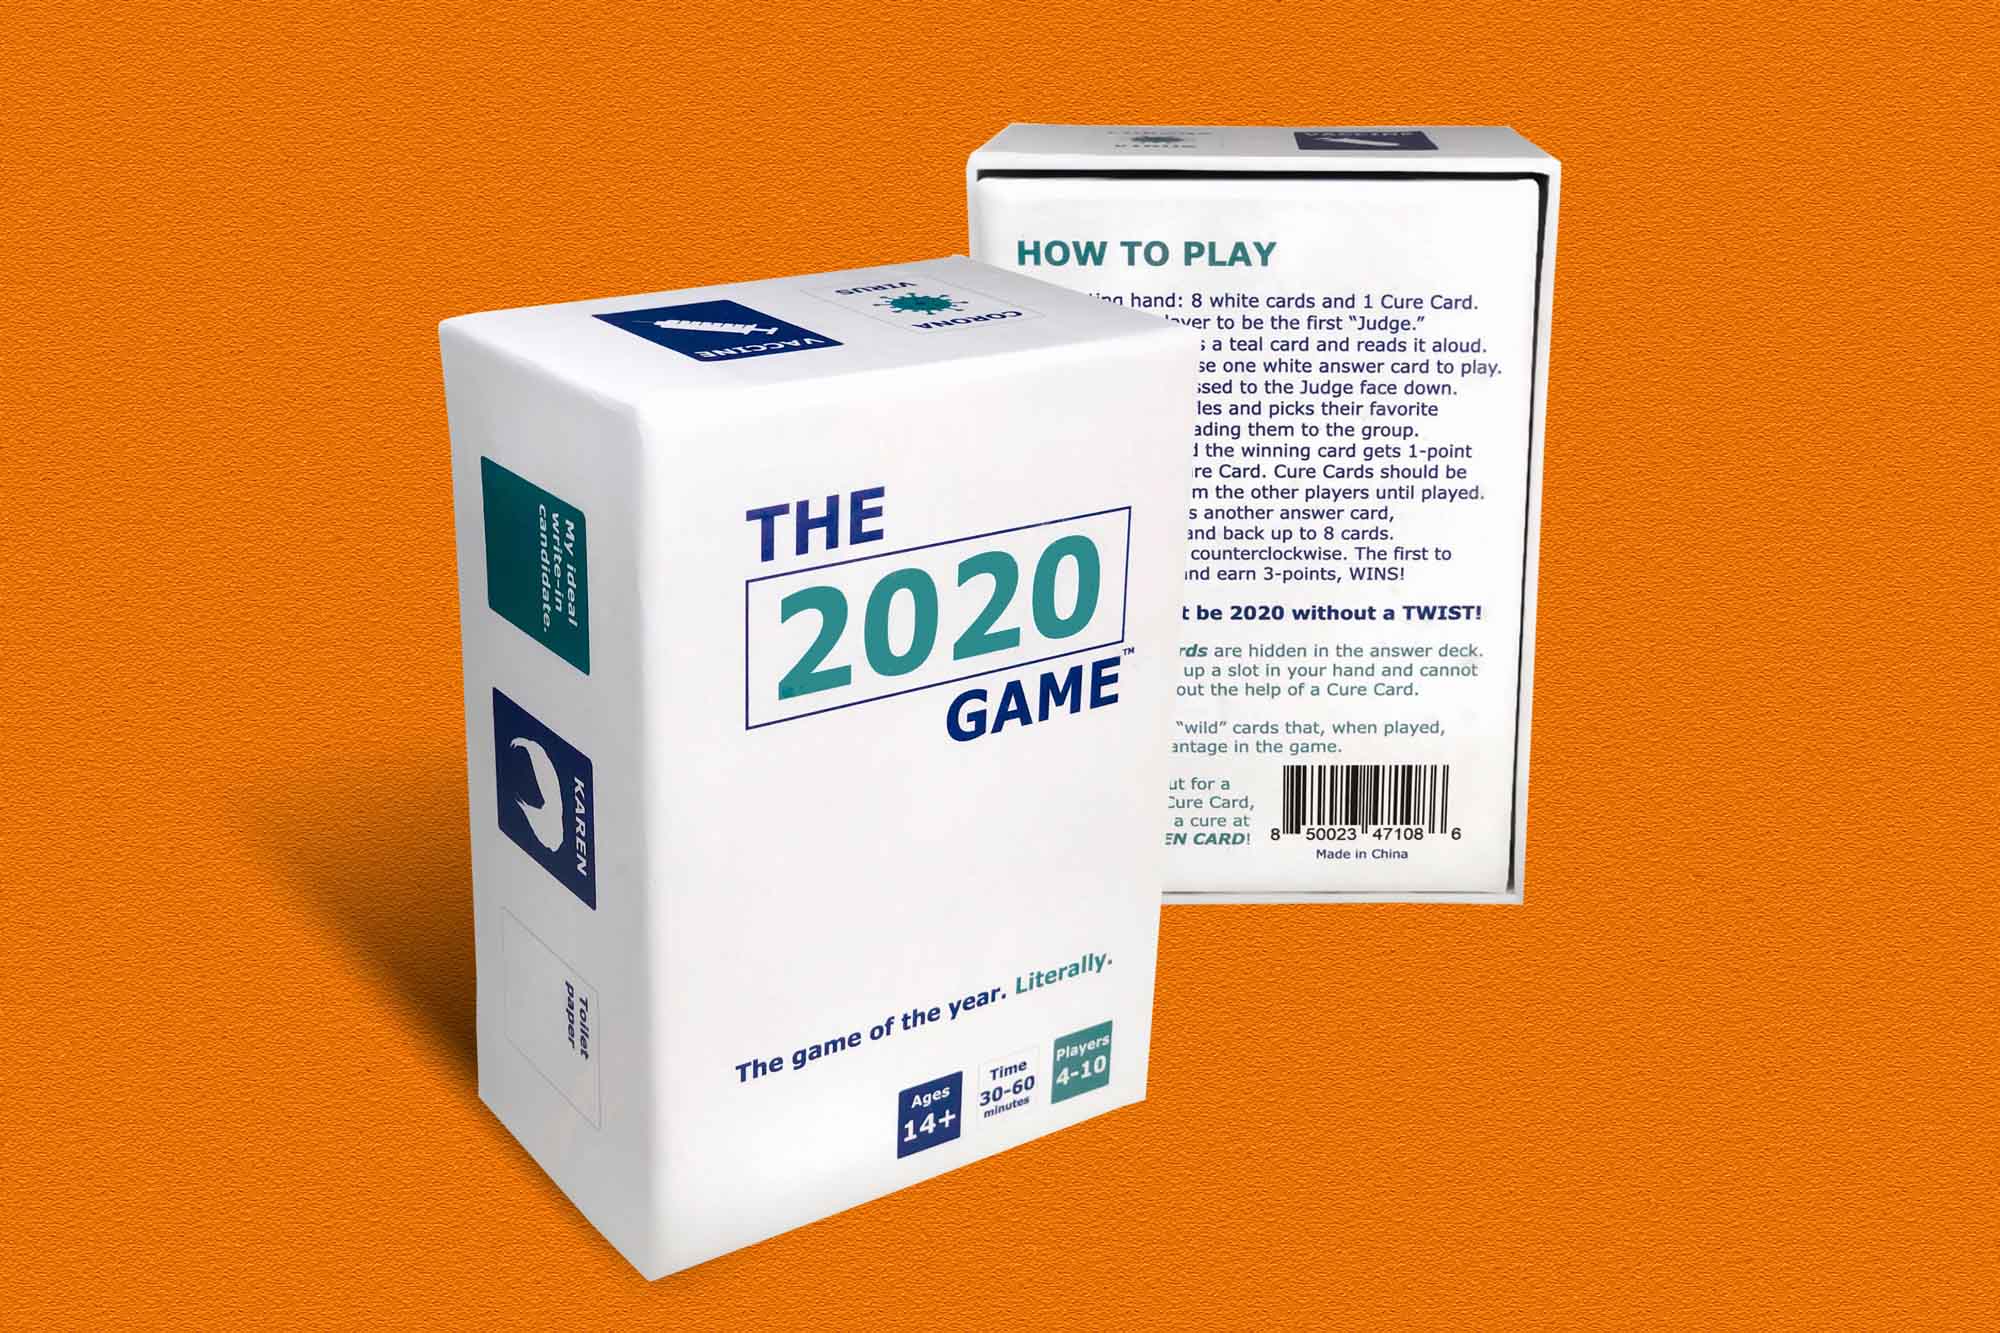 The 2020 Game box